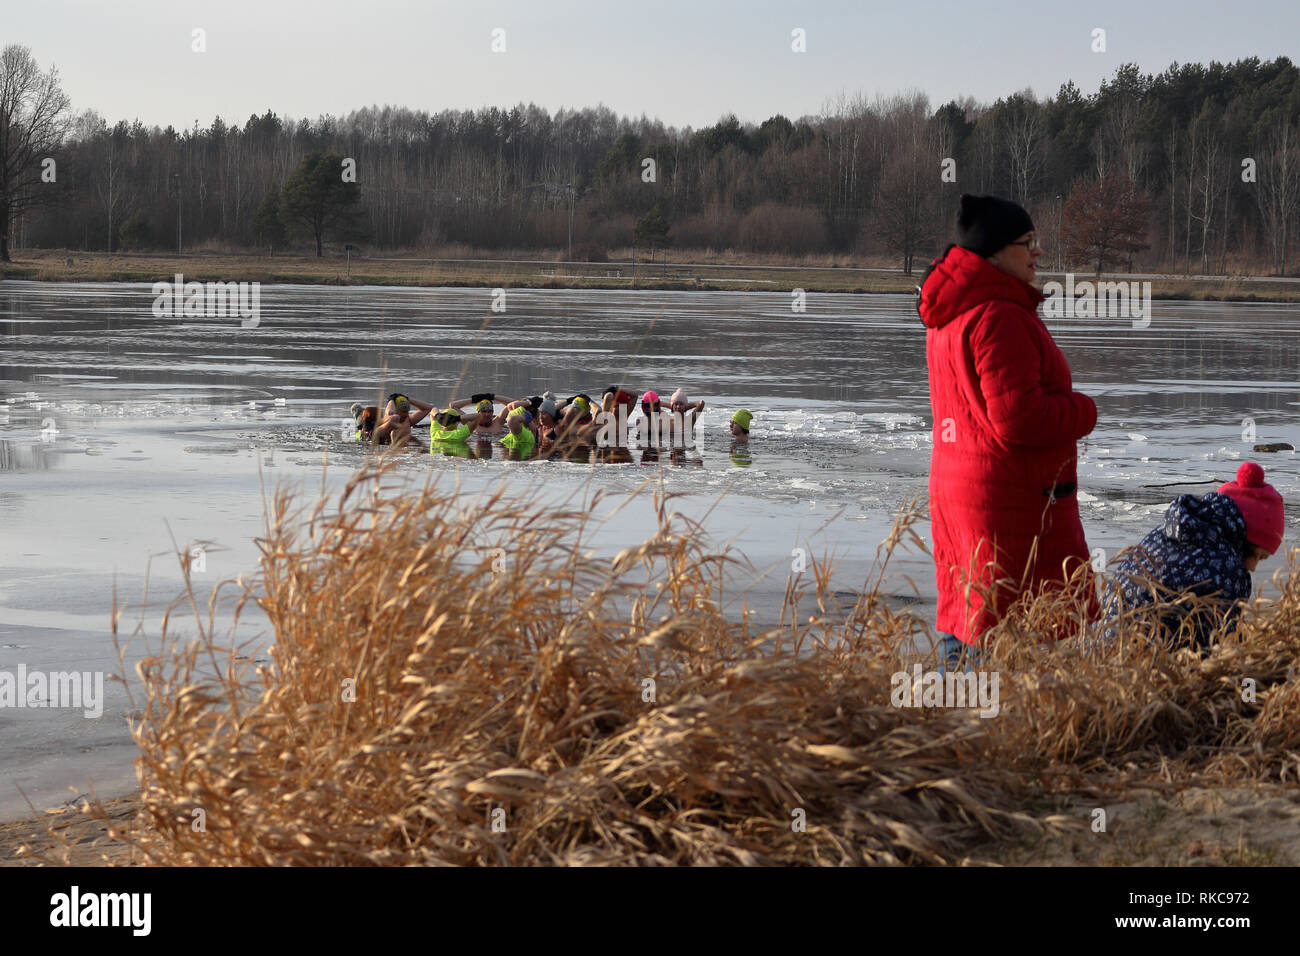 Umer, Poland. 10th Feb 2019.  A group of people winter bath in ice covered lake while observers dressed in warm clothes watch the event Credit: Slawomir Wojcik/Alamy Live News Stock Photo